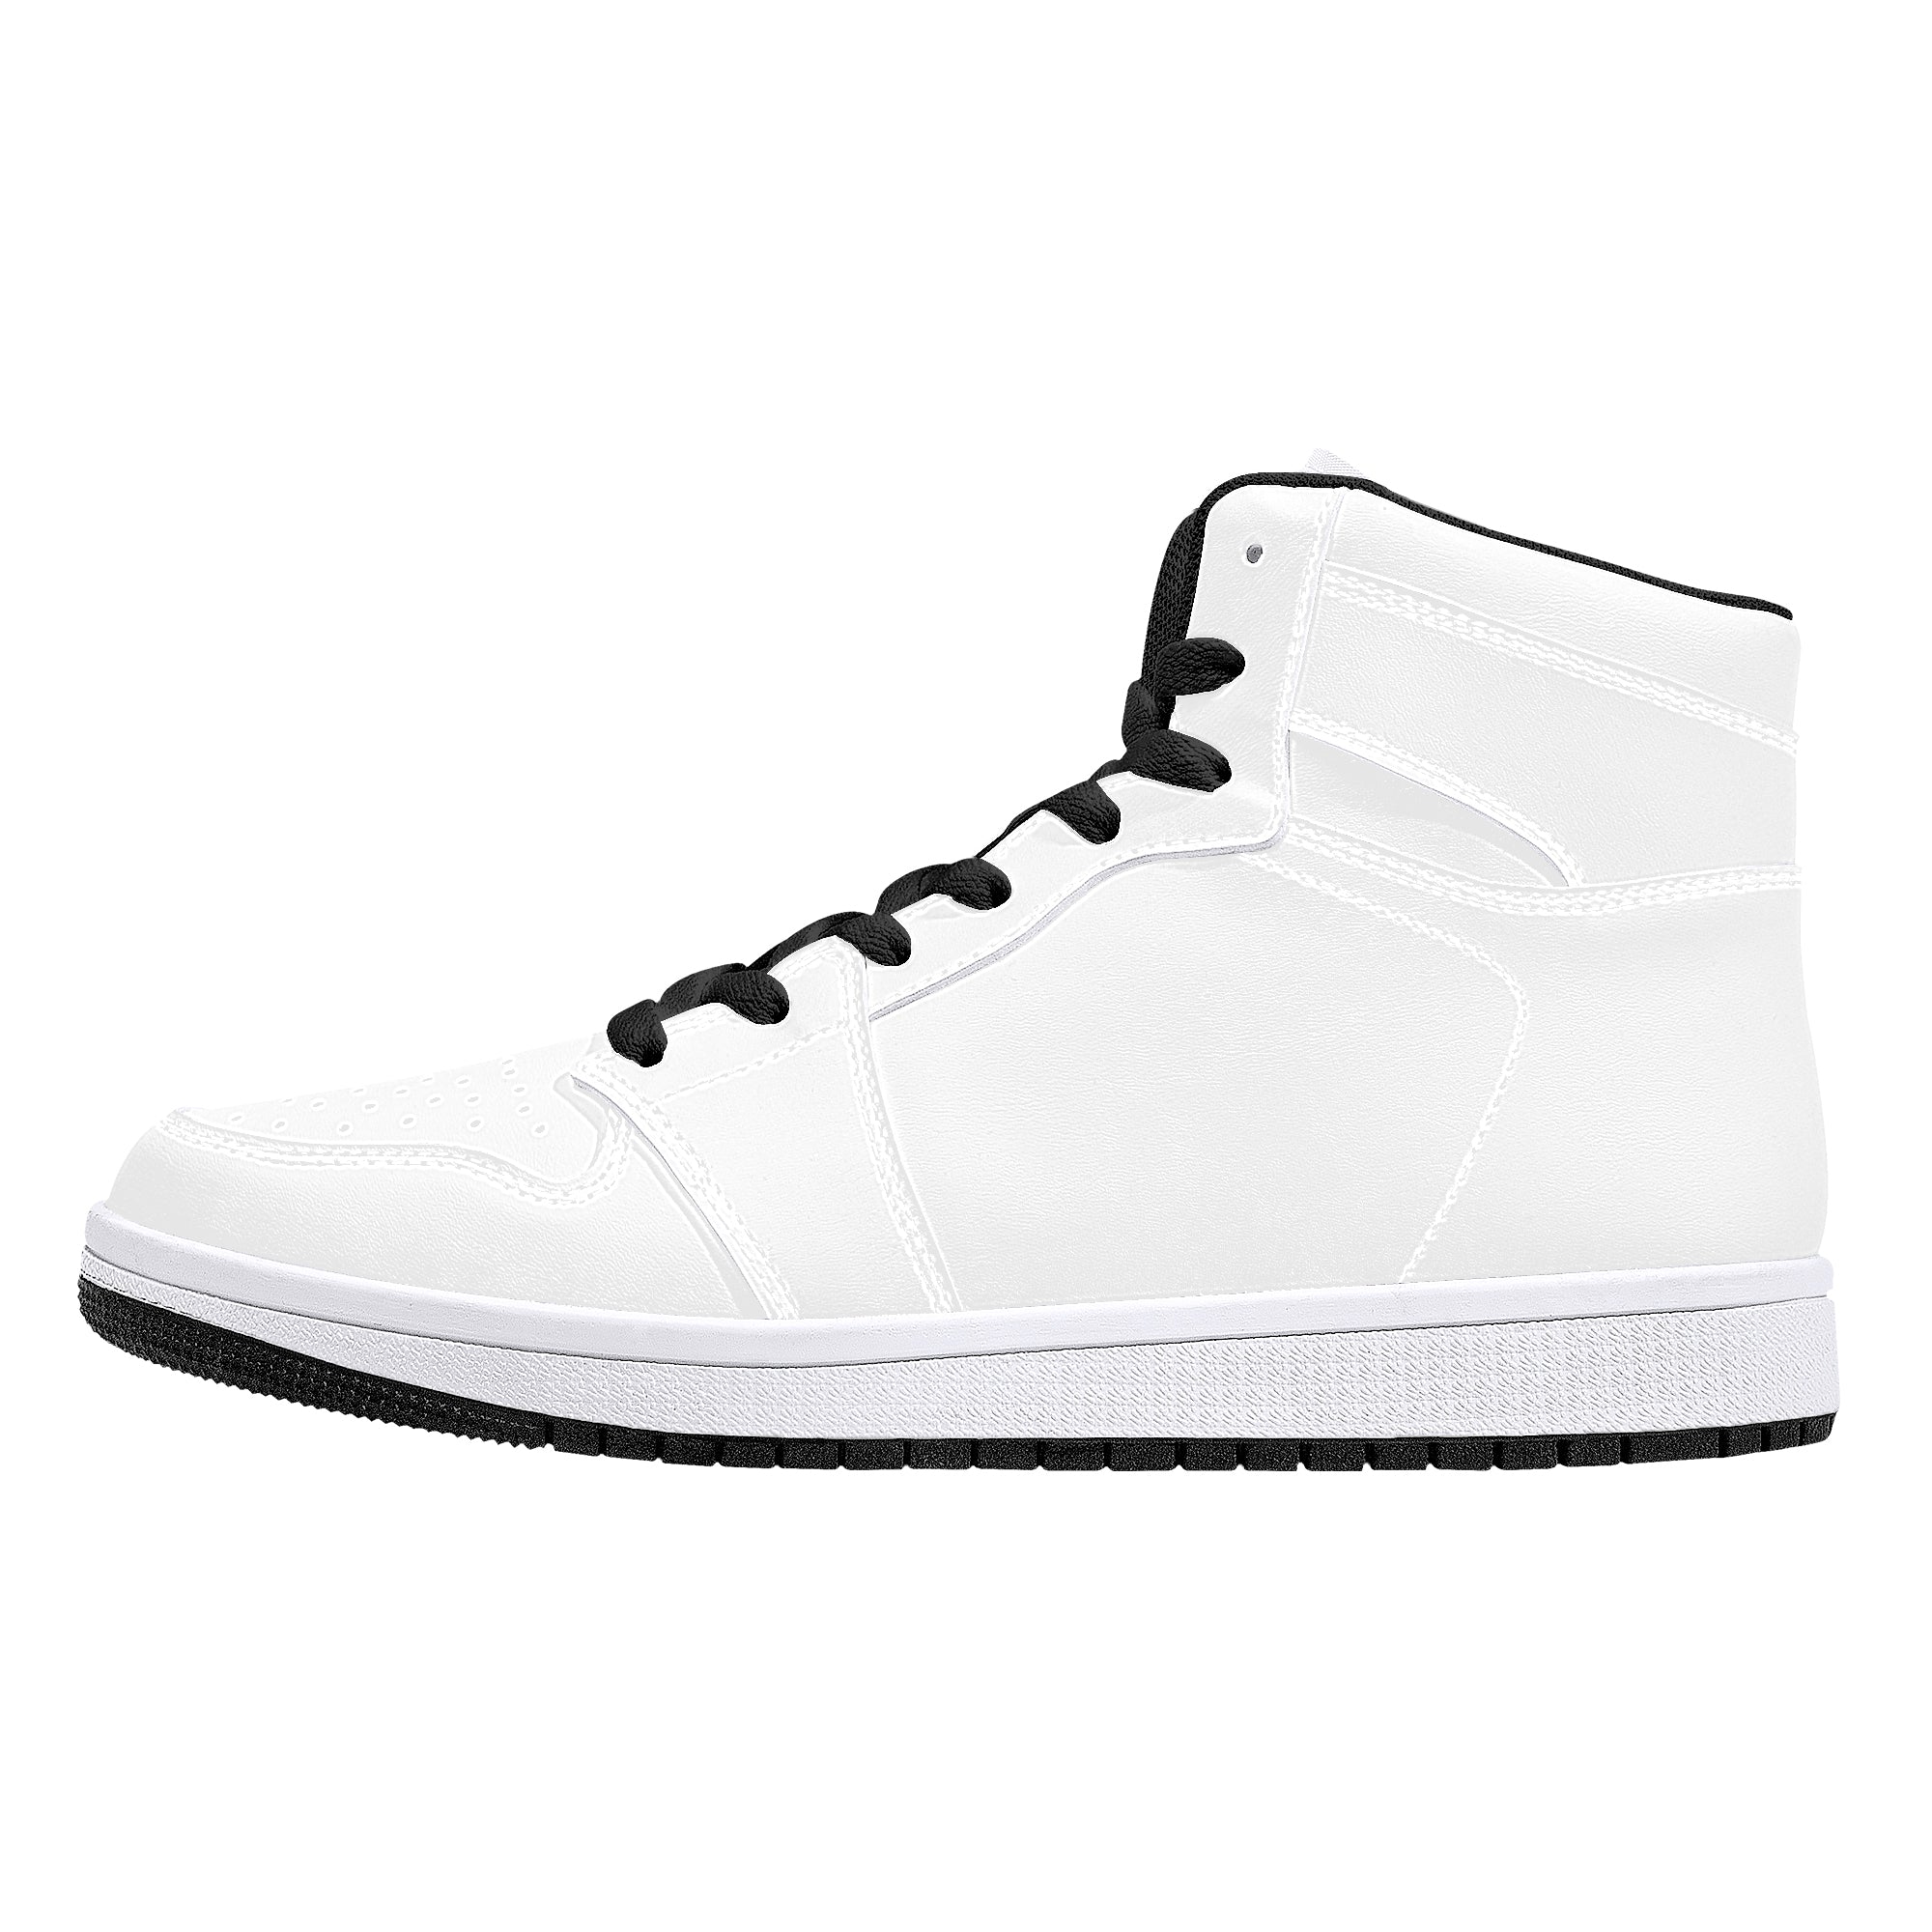 Customizable High-Top Synthetic Leather Sneakers - Black - Shoe Zero